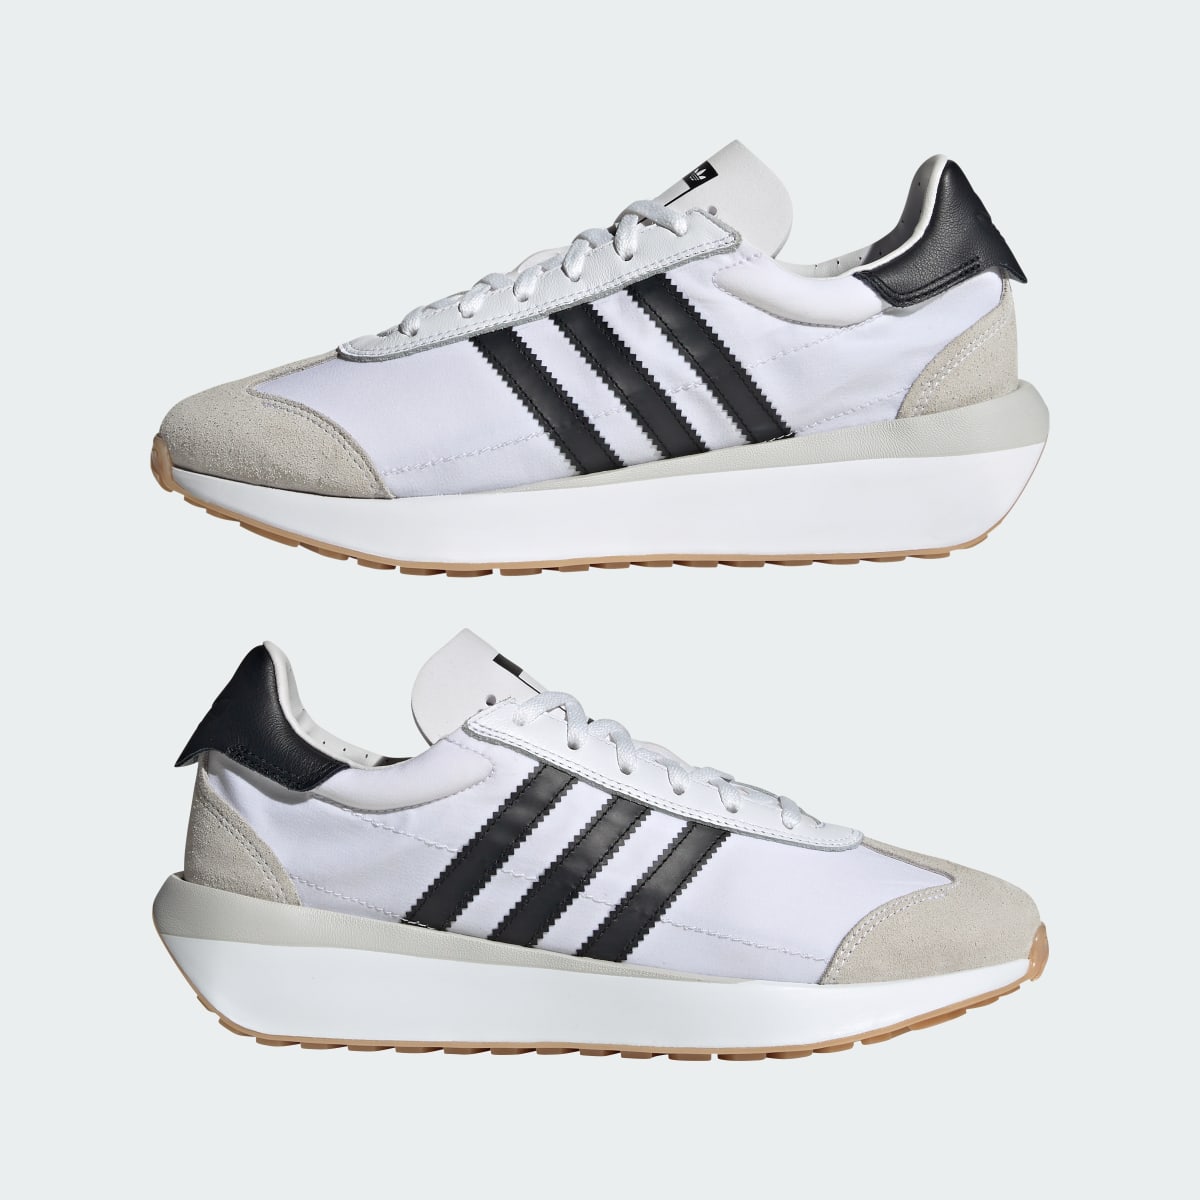 Adidas Country XLG Shoes. 8